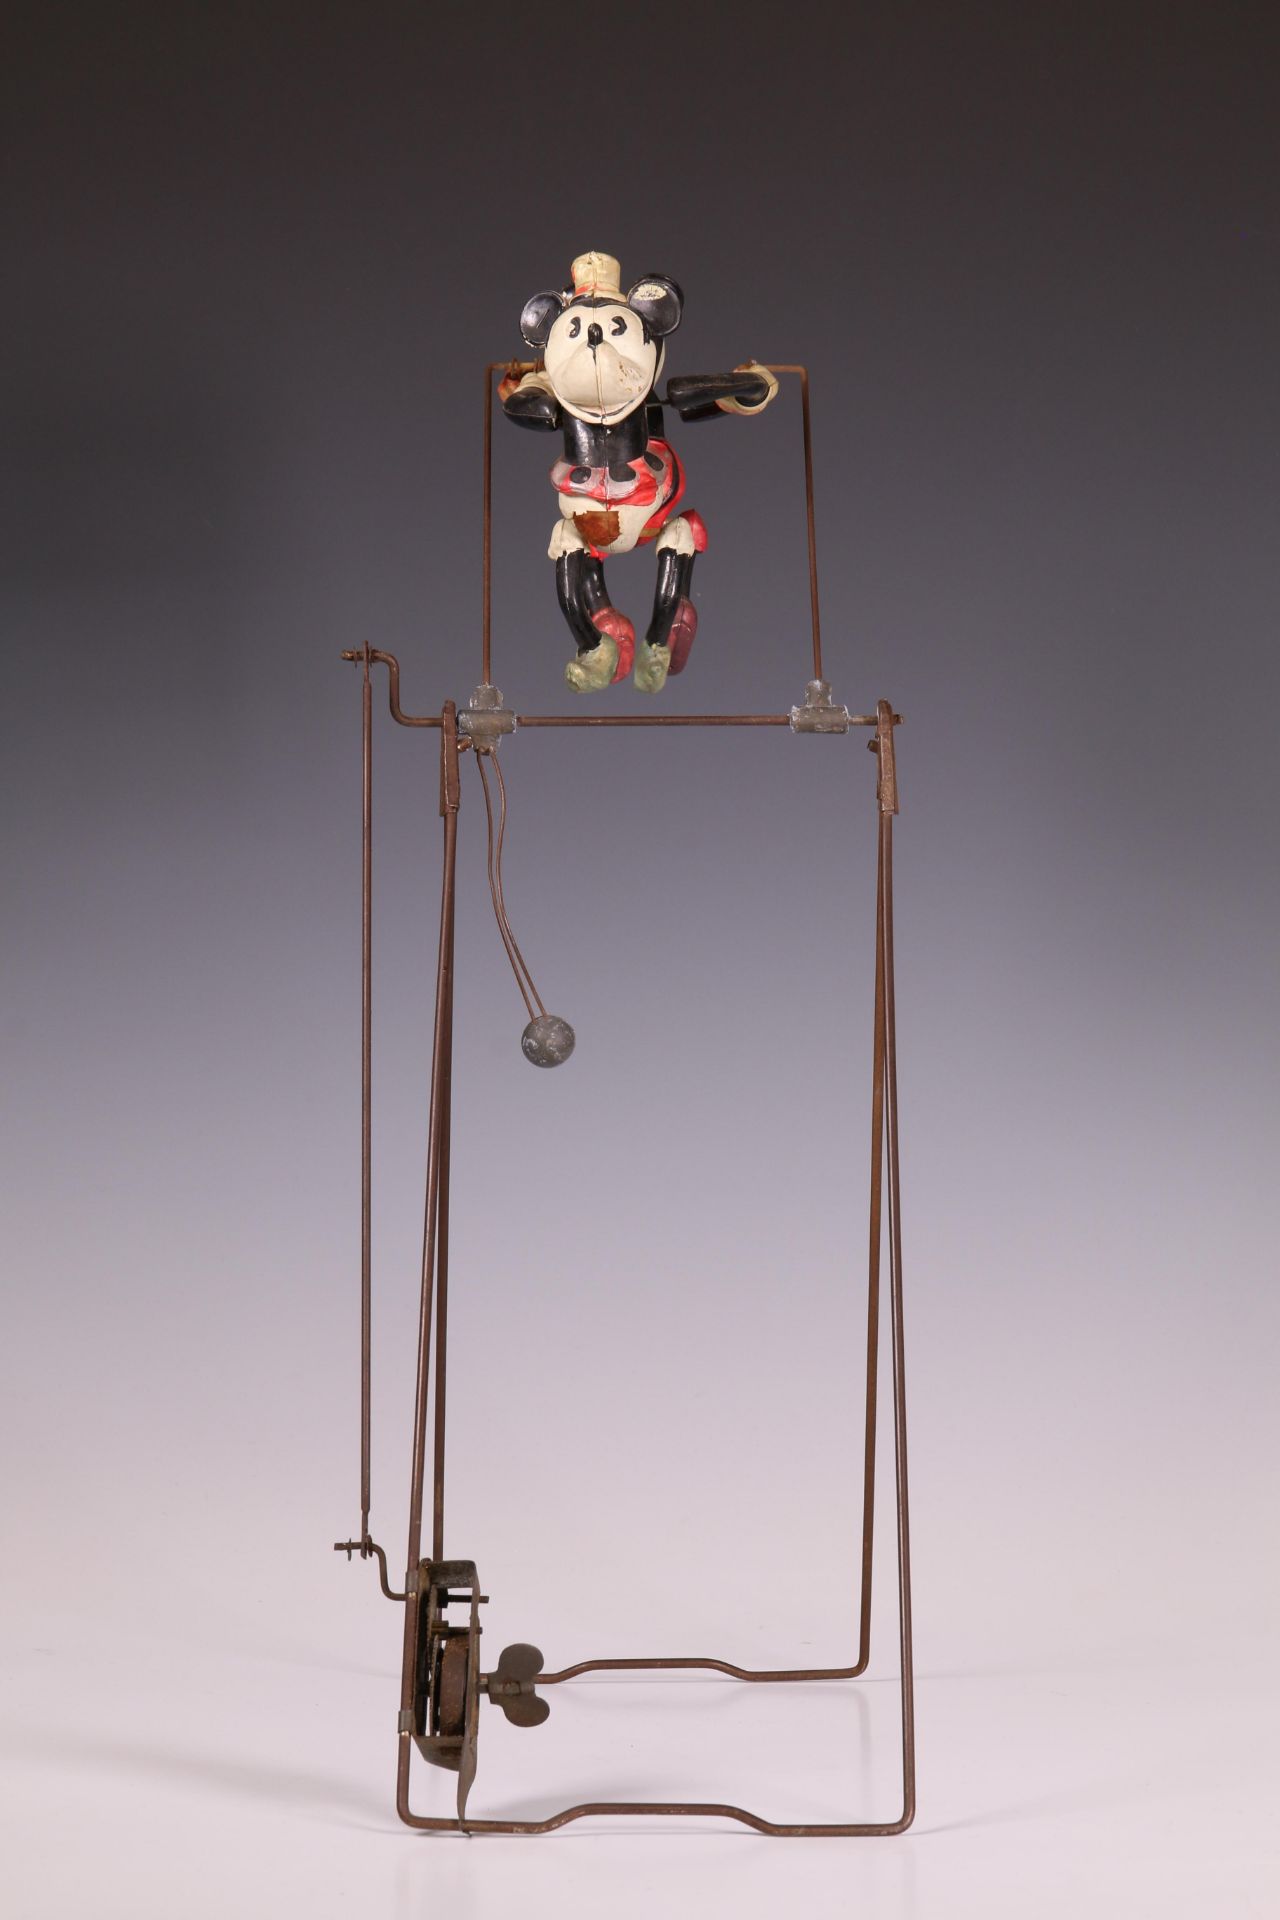 Japan, Mickey en Minnie Mouse in balans, ca. 1930. - Image 4 of 8